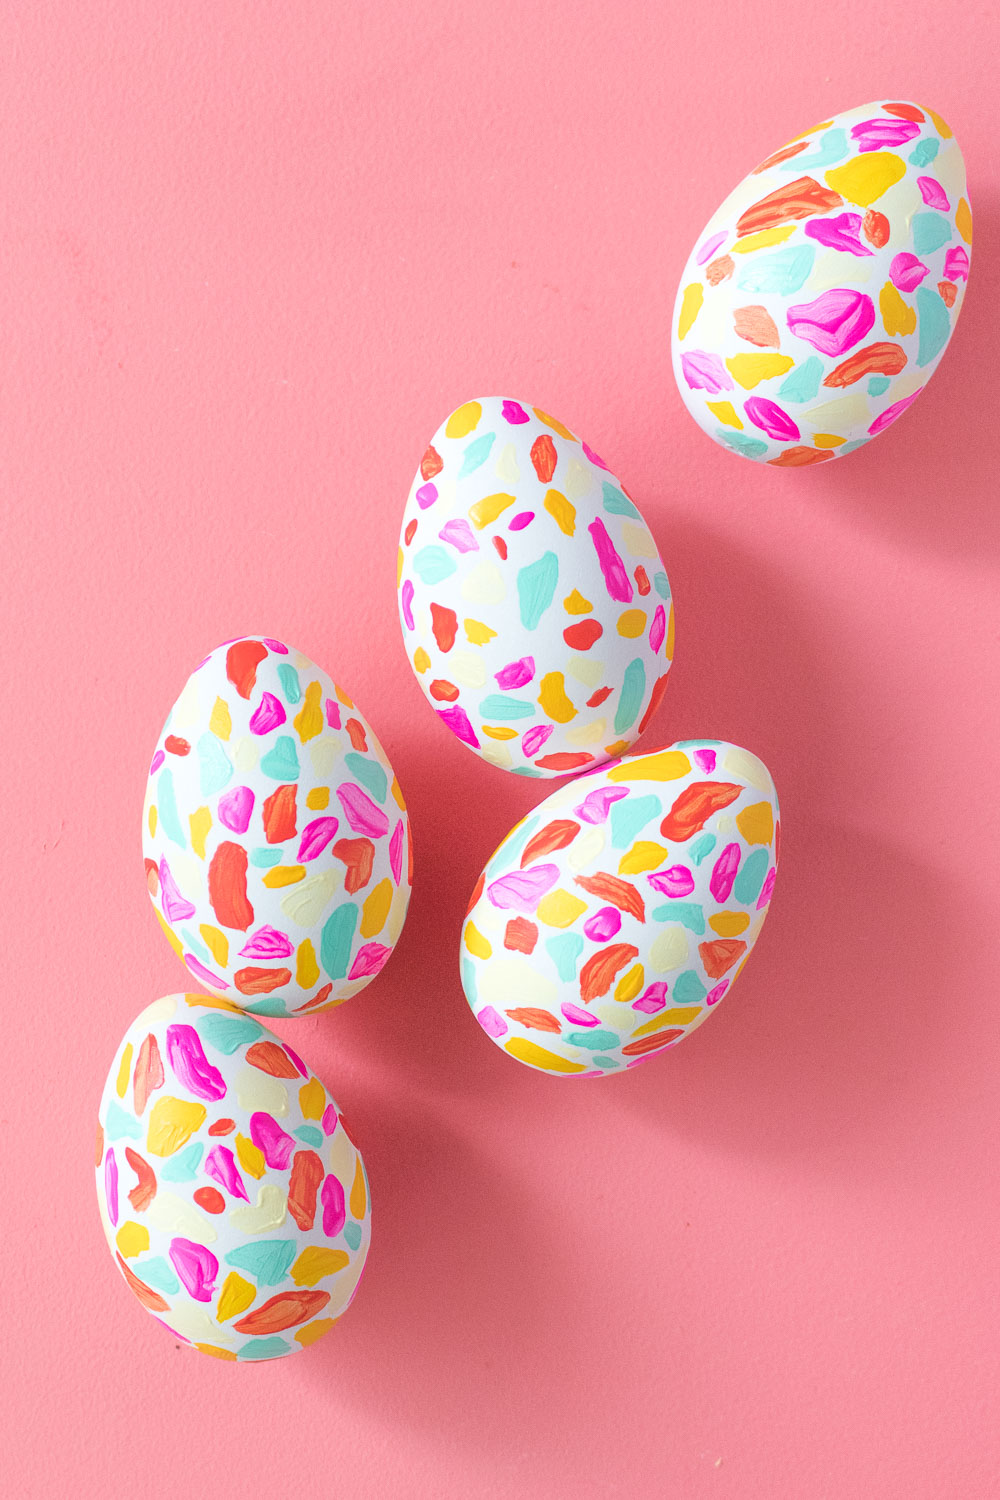 Easter eggs decorating ideas